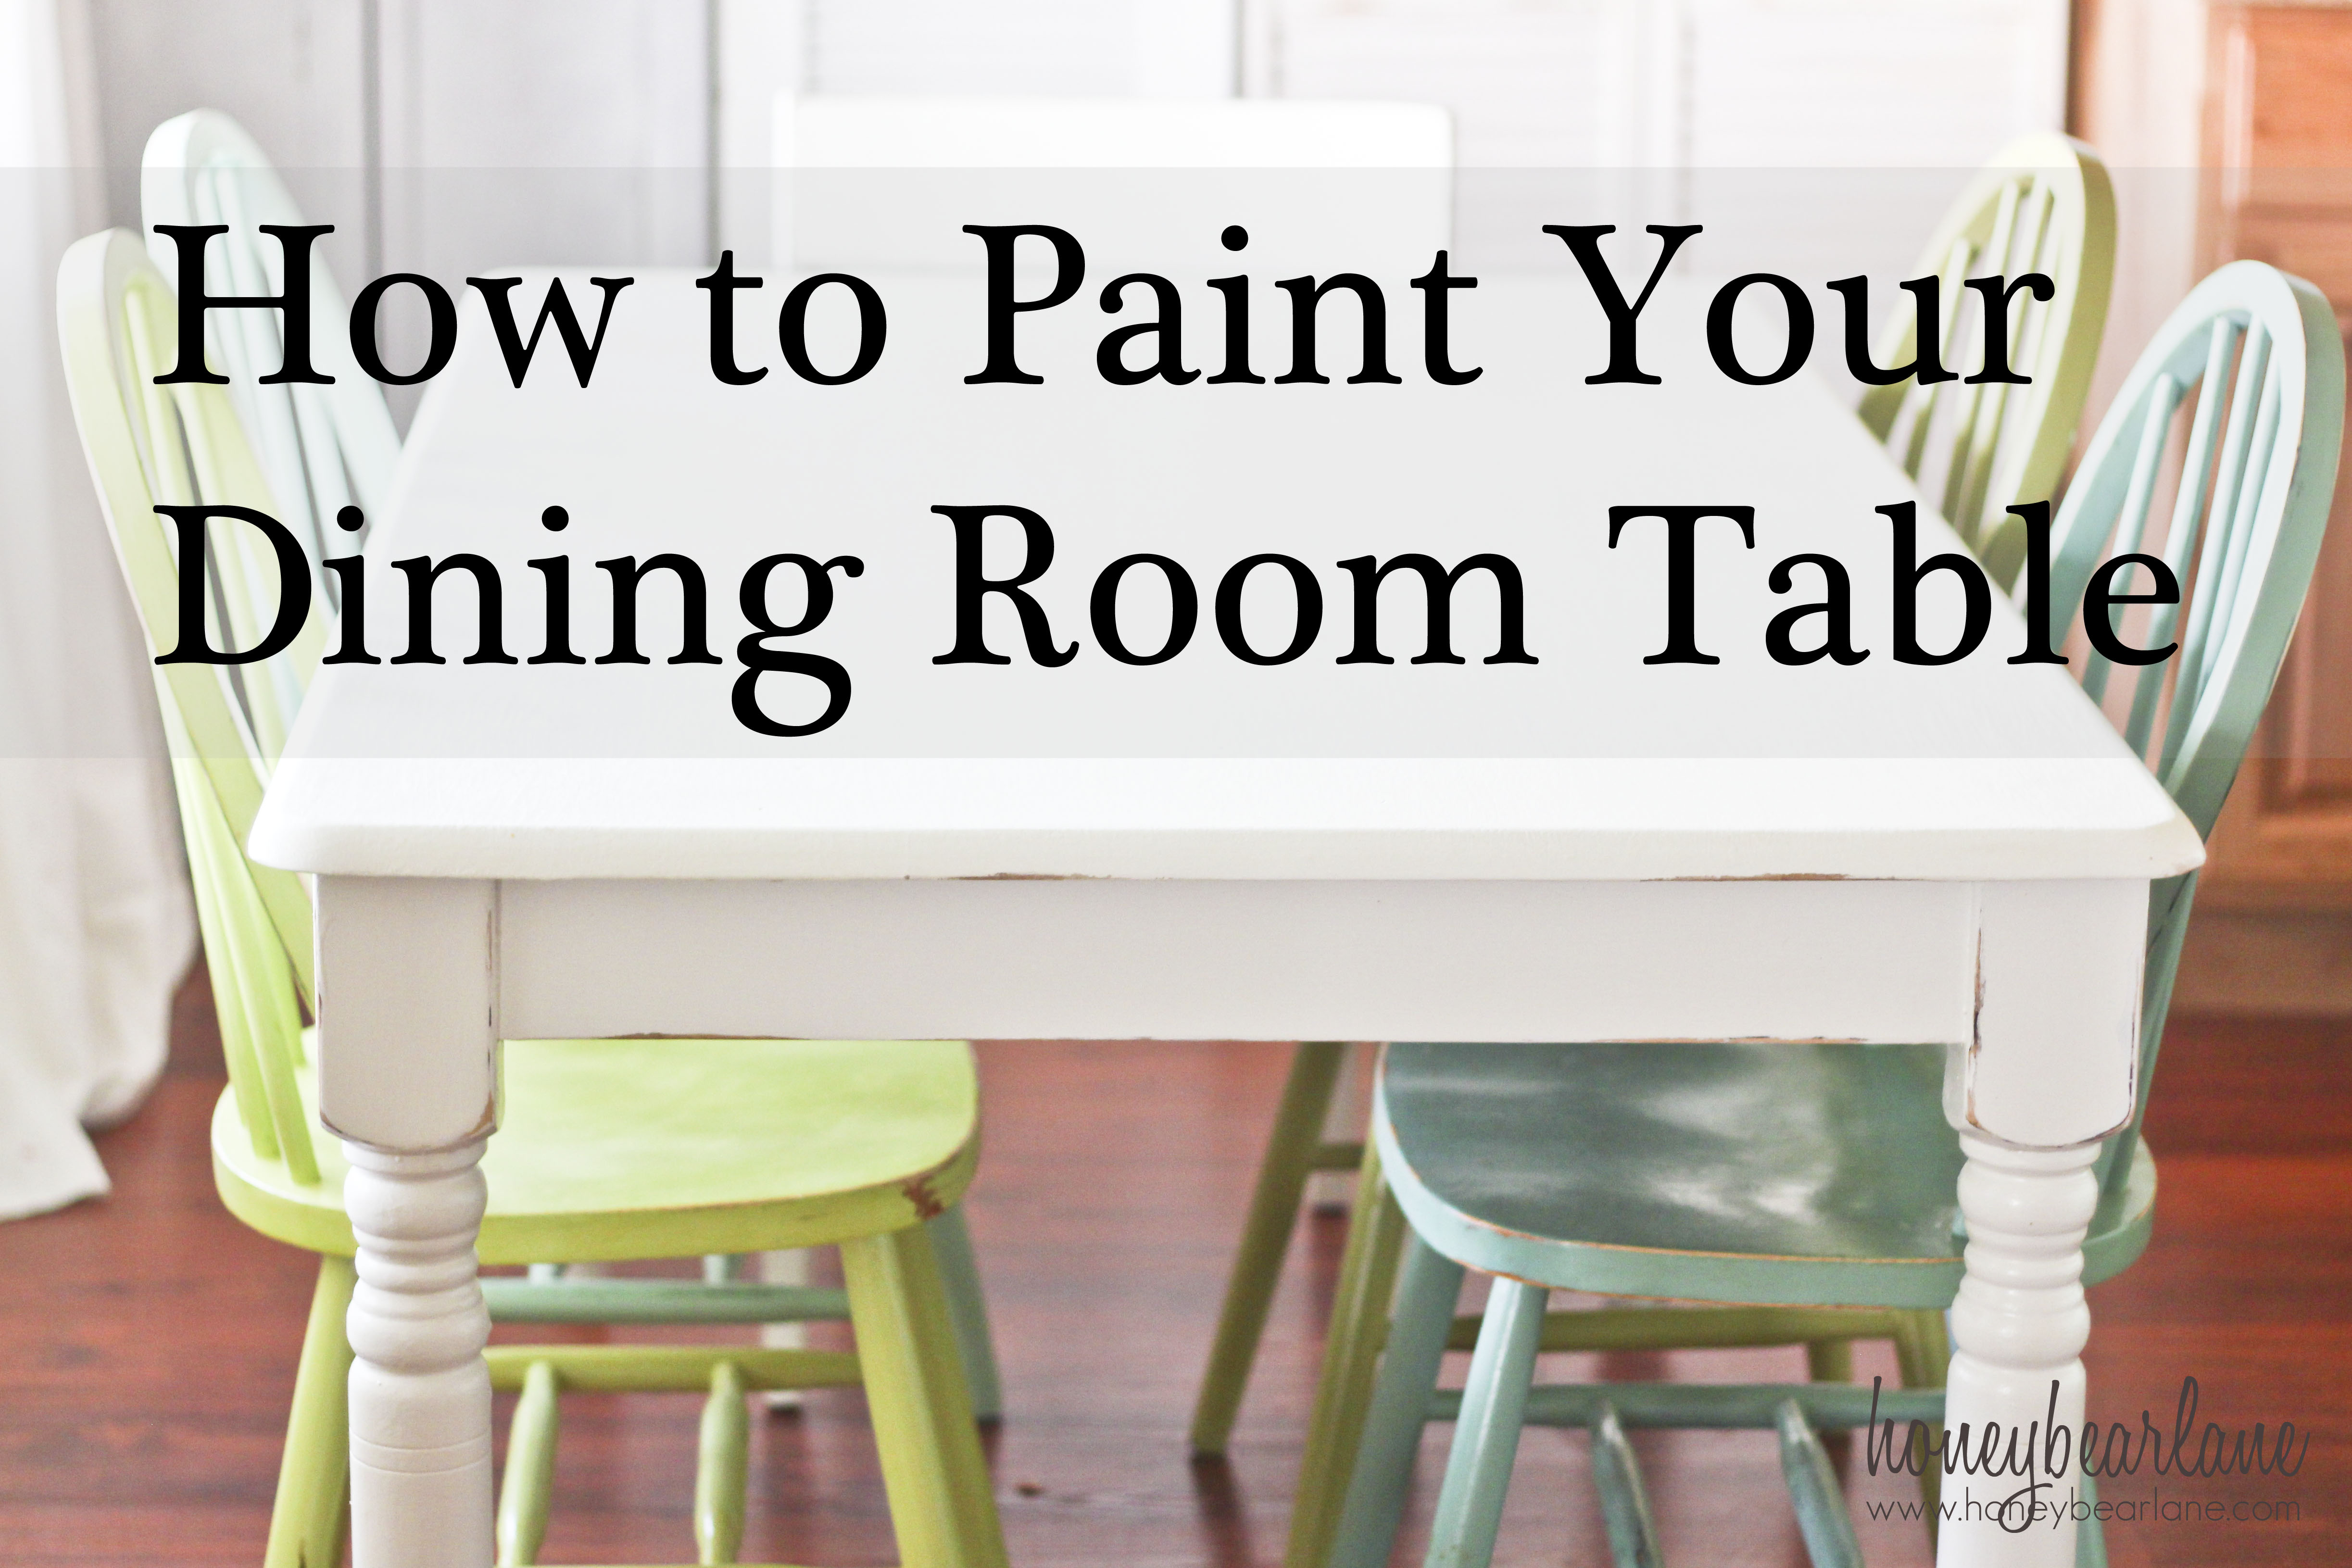 Painting the Dining Room Table: A Survivor's Story - HoneyBear Lane